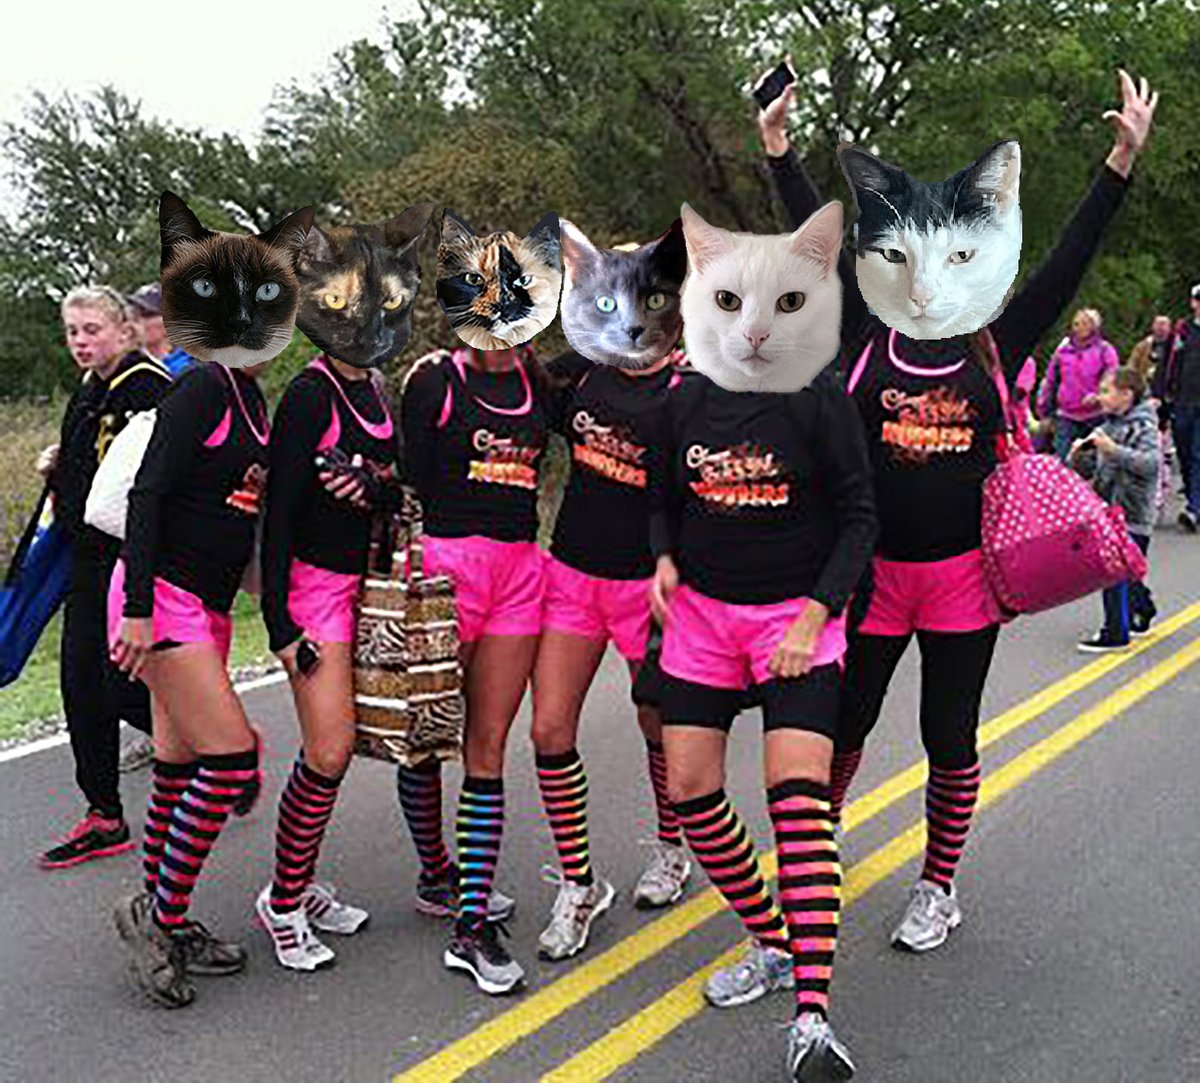 #zzst @catsrule0 @MauSupercat @JennyNicholas4 @GeneralBazz @gensbazzbiddy @AviwhiteGSD Heheh, the girls are ready for the 100 mile walk. We can do it, we strong ladies. Hup Two Three Four and off we go.